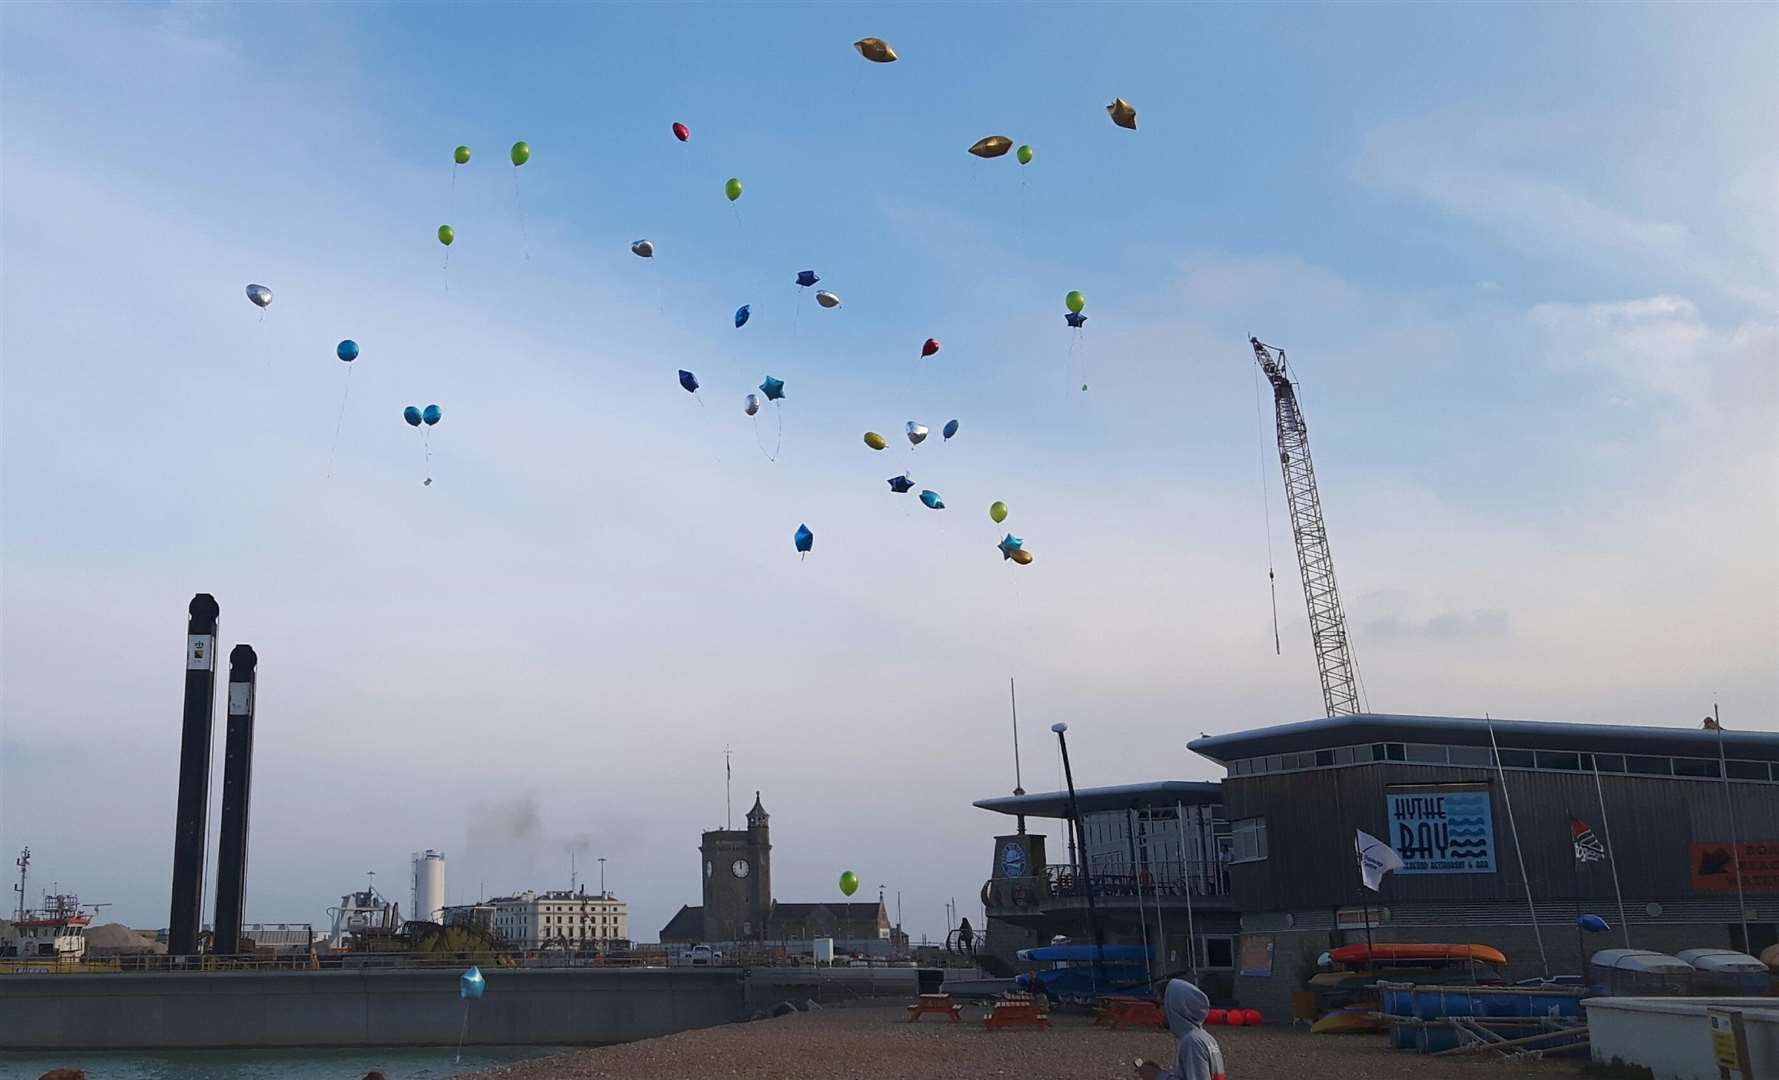 The balloons high in the air to commemorate Steven.